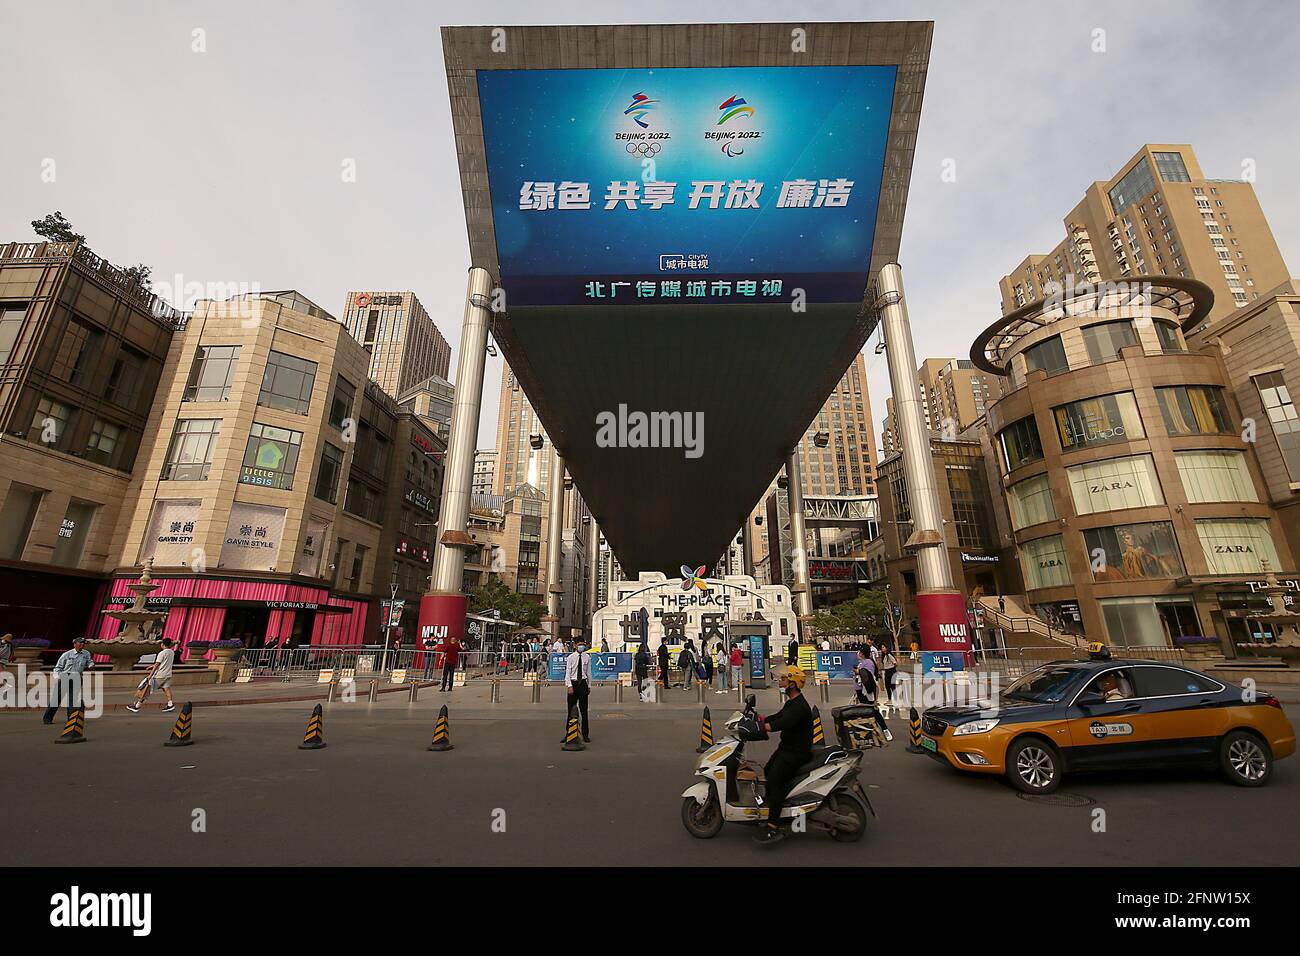 Beijing, China. 19th May, 2021. The 2022 Winter Olympics are promoted on a giant screen at an upscale, Western shopping galleria in Beijing on Wednesday, May 19, 2021. Groups alleging human rights abuses against minorities in China are calling for a full-blown boycott of the 2022 Winter Olympics in China's capital, a move likely to increase pressure on the International Olympic Committee (IOC), athletes, sponsors and sports federations. Photo by Stephen Shaver/UPI Credit: UPI/Alamy Live News Stock Photo